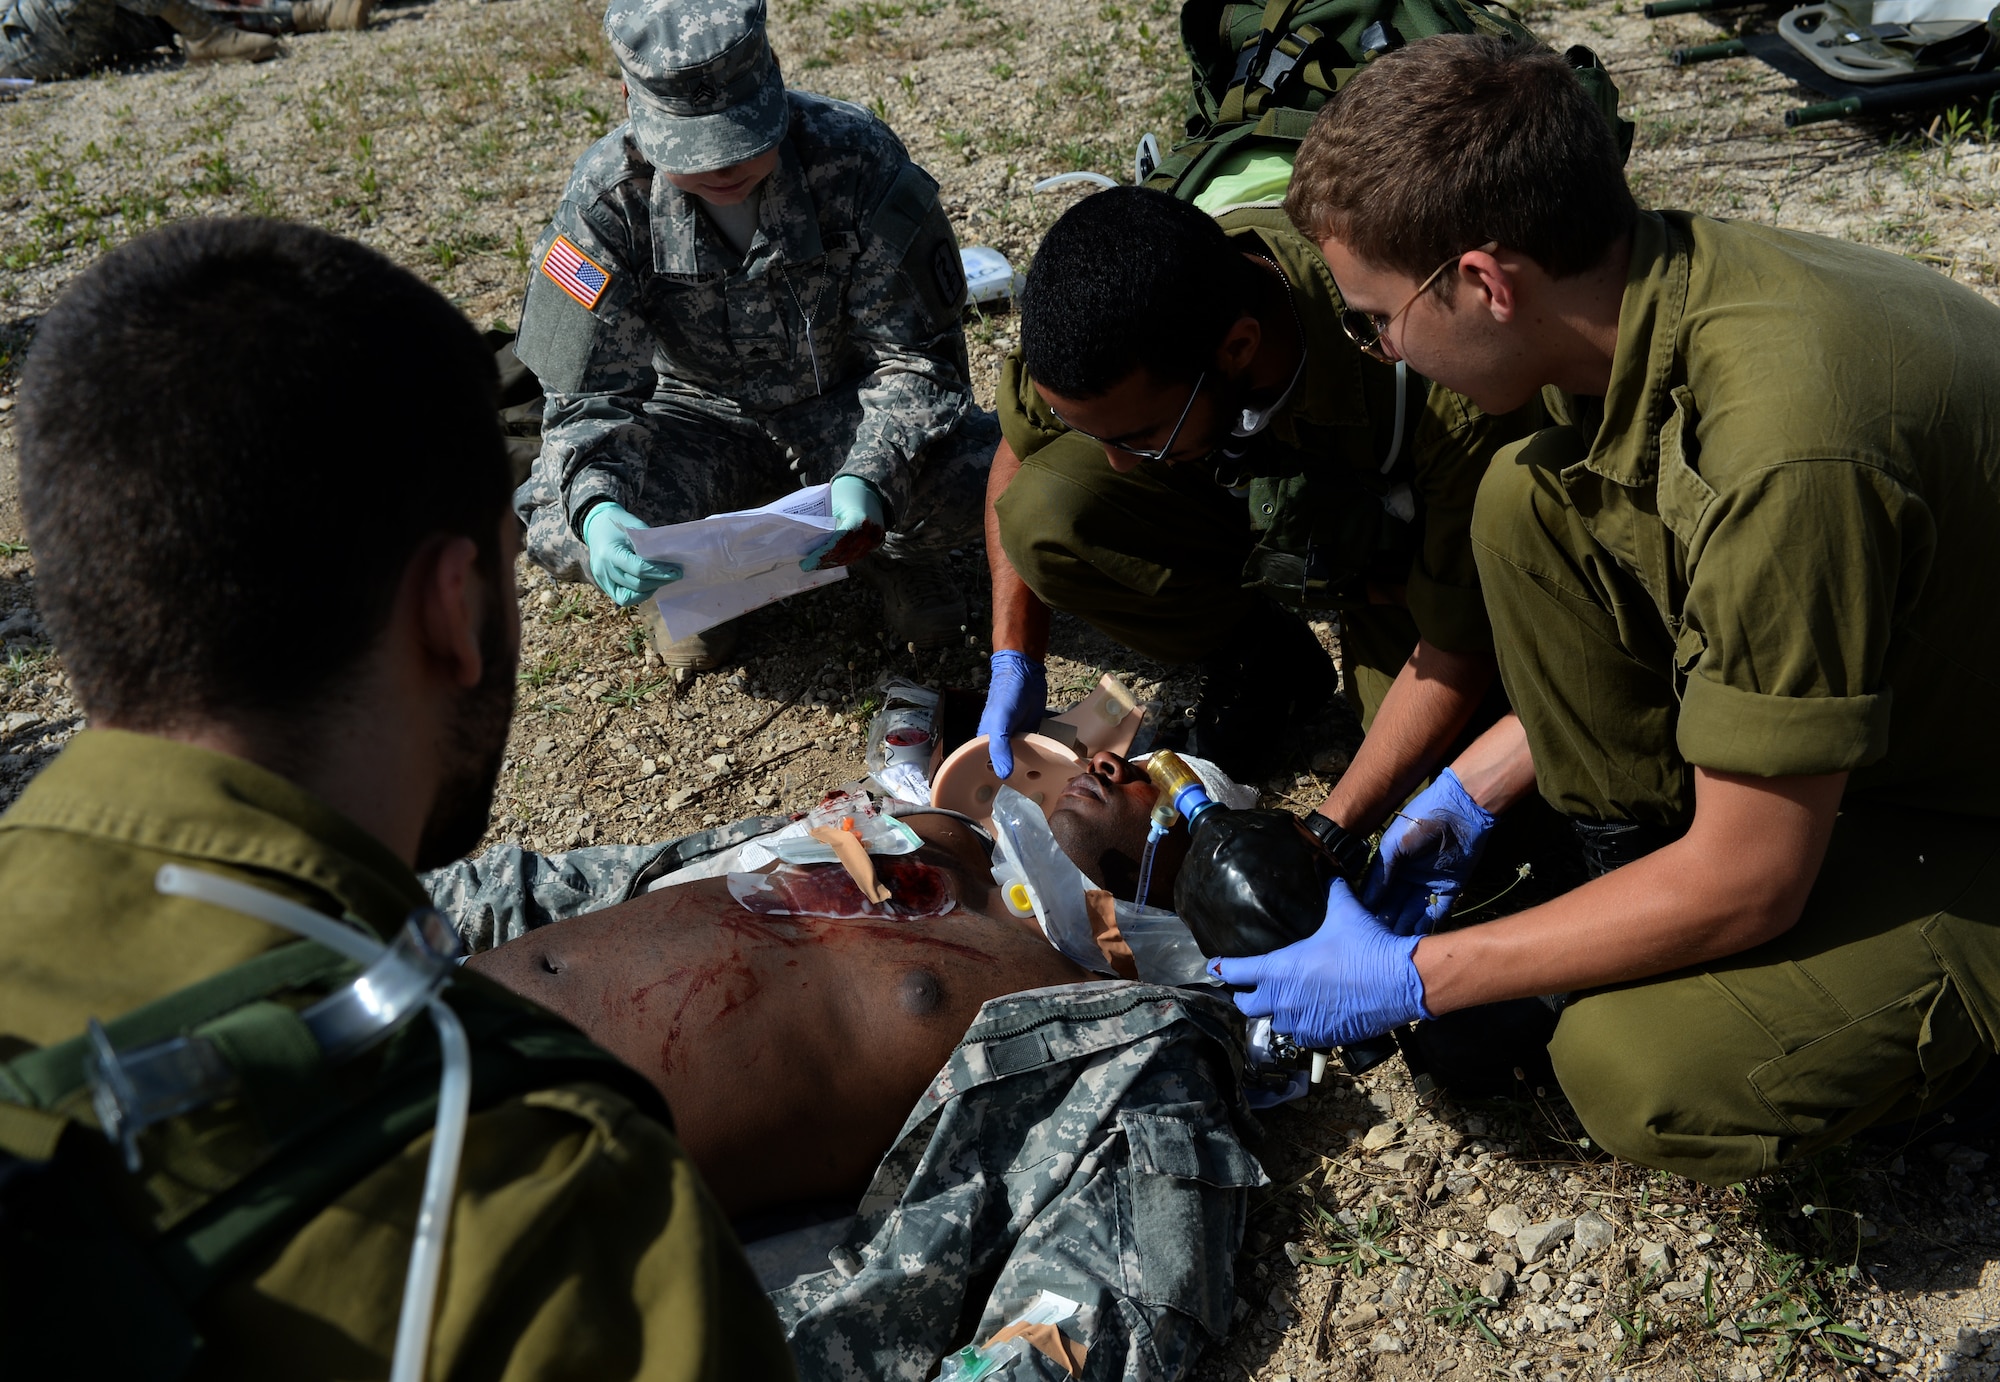 Israeli and U.S. military medics treat the simulated wounds on Army Staff Sgt. Willie Morgan and Atlanta native, during a simulated medical evacuation as part of the Juniper Cobra 14 defense training exercise May 20, 2014, in Hatzor Air Base, Israel. Approximately 2,000 U.S. service members and civilians stationed in Europe and the United States traveled to Israel to participate in JC14 as a training audience or exercise evaluators. Morgan is a generator mechanic assigned to the 10th Army and Missile Defense Command at Kaiserslautern, Germany.  (U.S. Air Force photo/Staff Sgt. Joe W. McFadden)